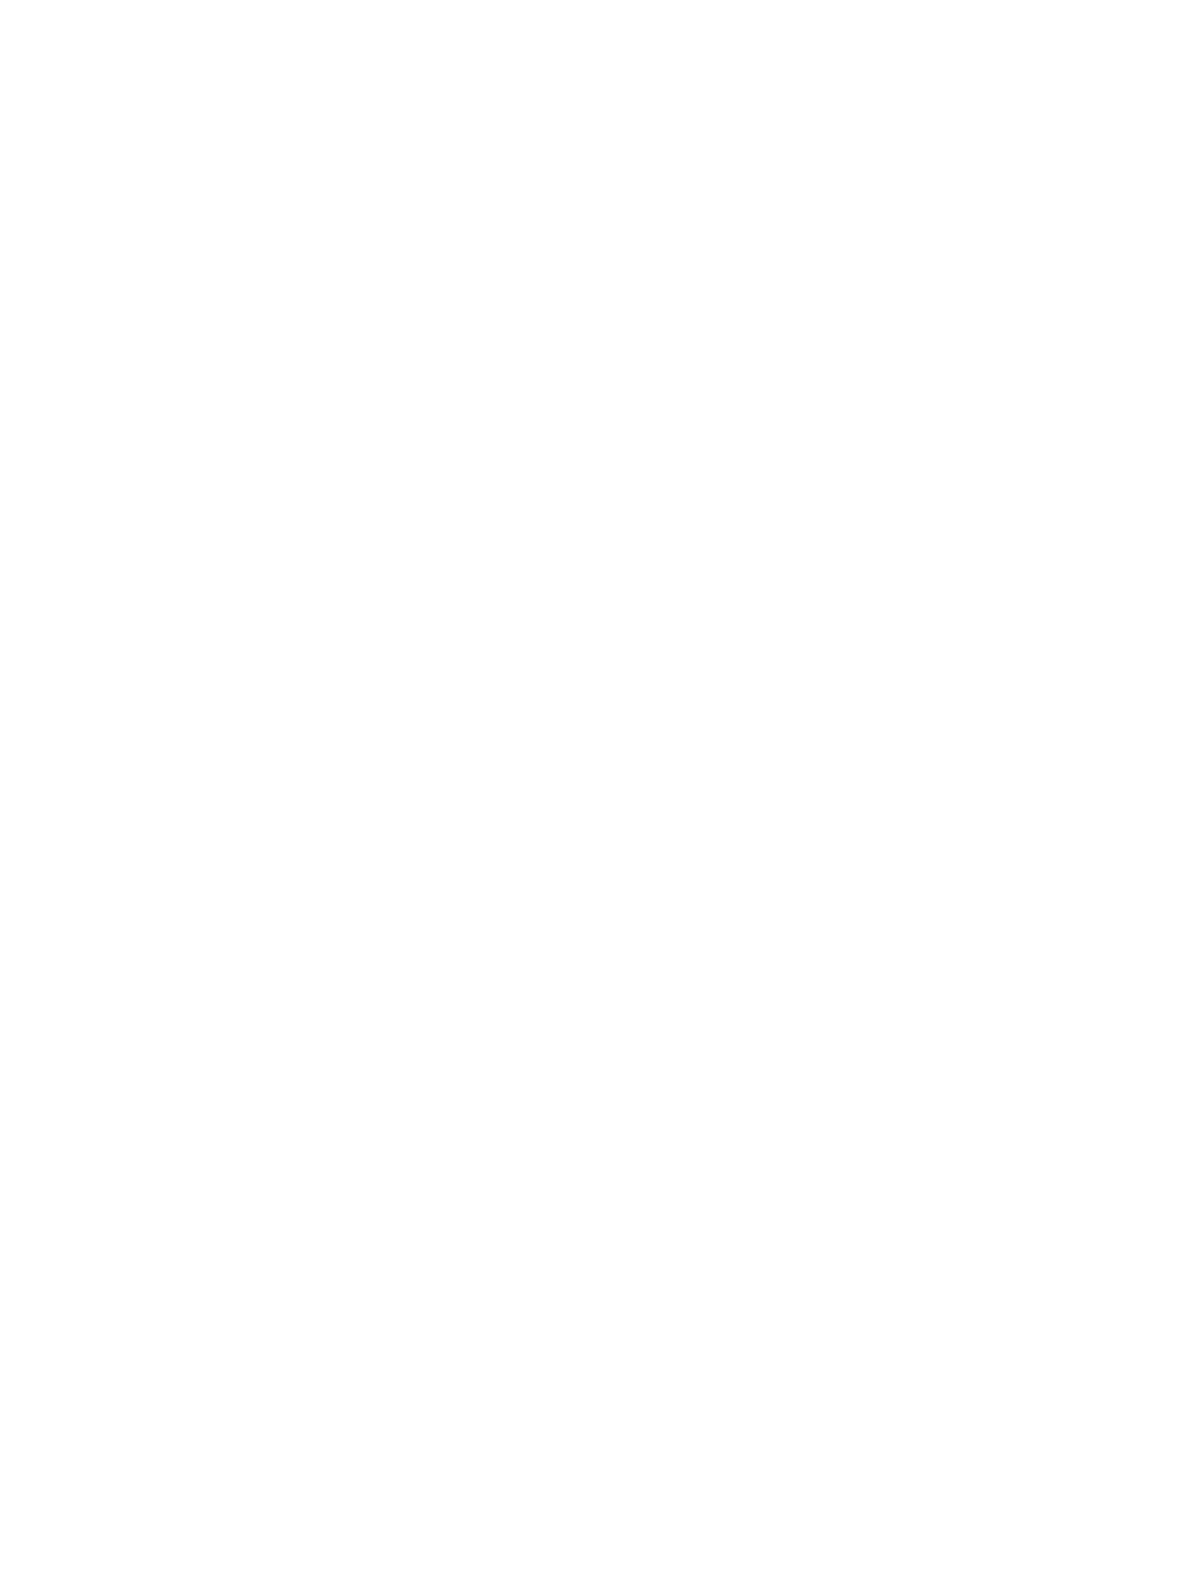 BP has partnered with Work+Family Solutions